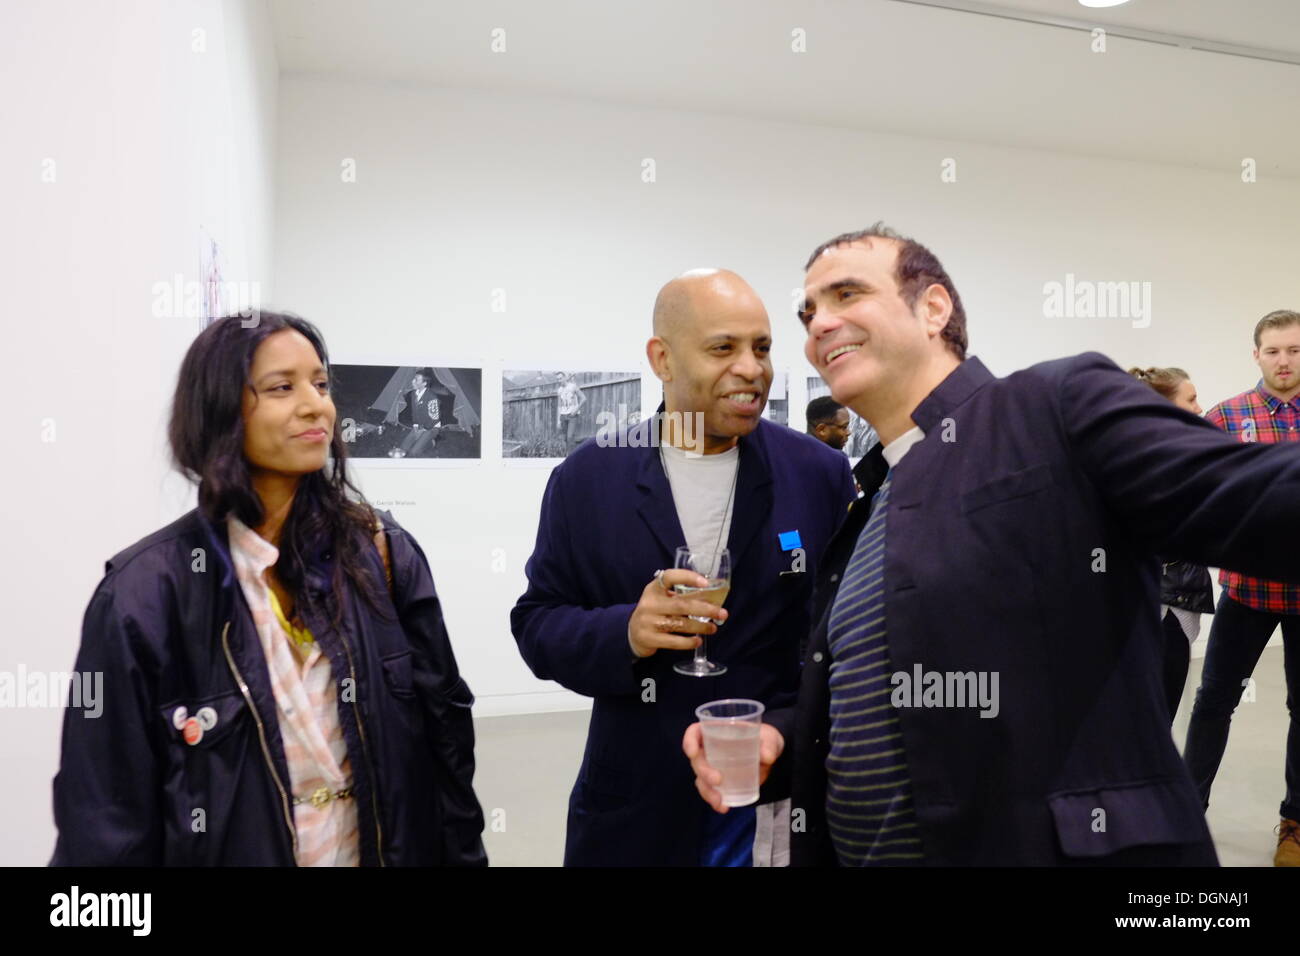 London, UK. 23rd Oct, 2013. Private view of Graphics exhibition focusing on Skinhead Cultureat the London College of Communication, Elephant and Castle, London, UK Credit:  Rachel Megawhat/Alamy Live News Stock Photo